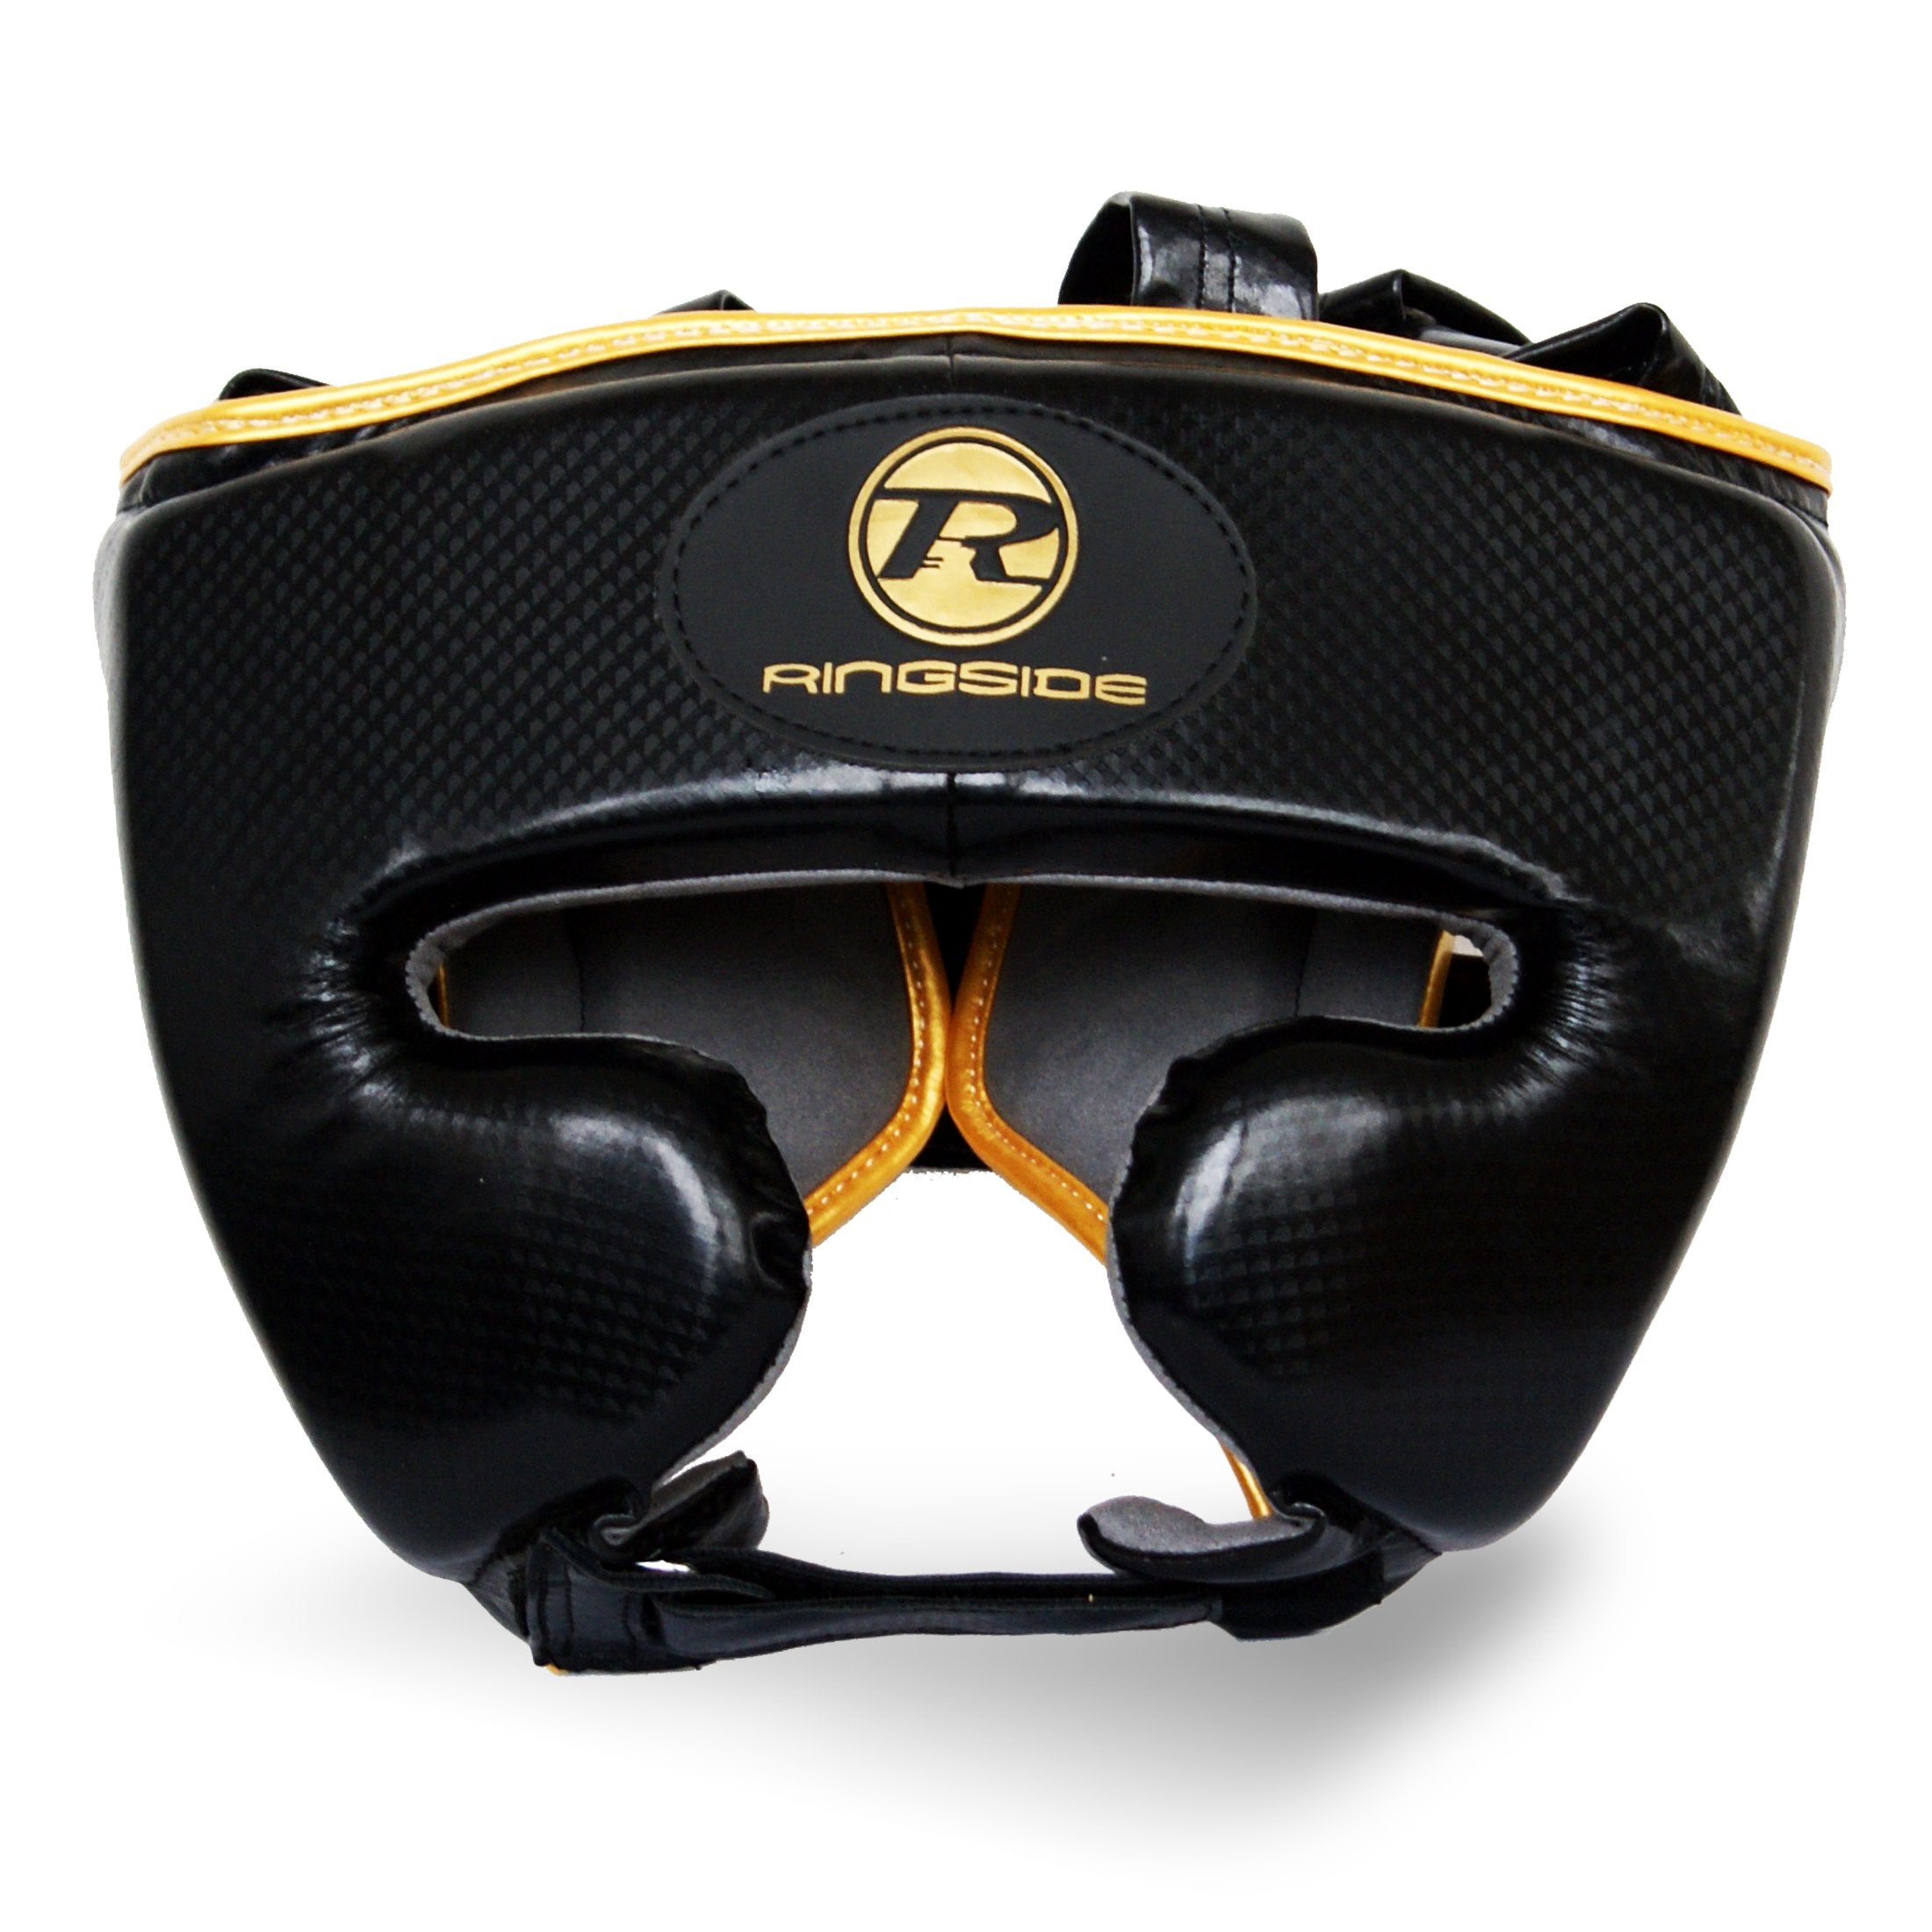 Pro Fitness Head Guard Synthetic Leather Metallic Black / Gold